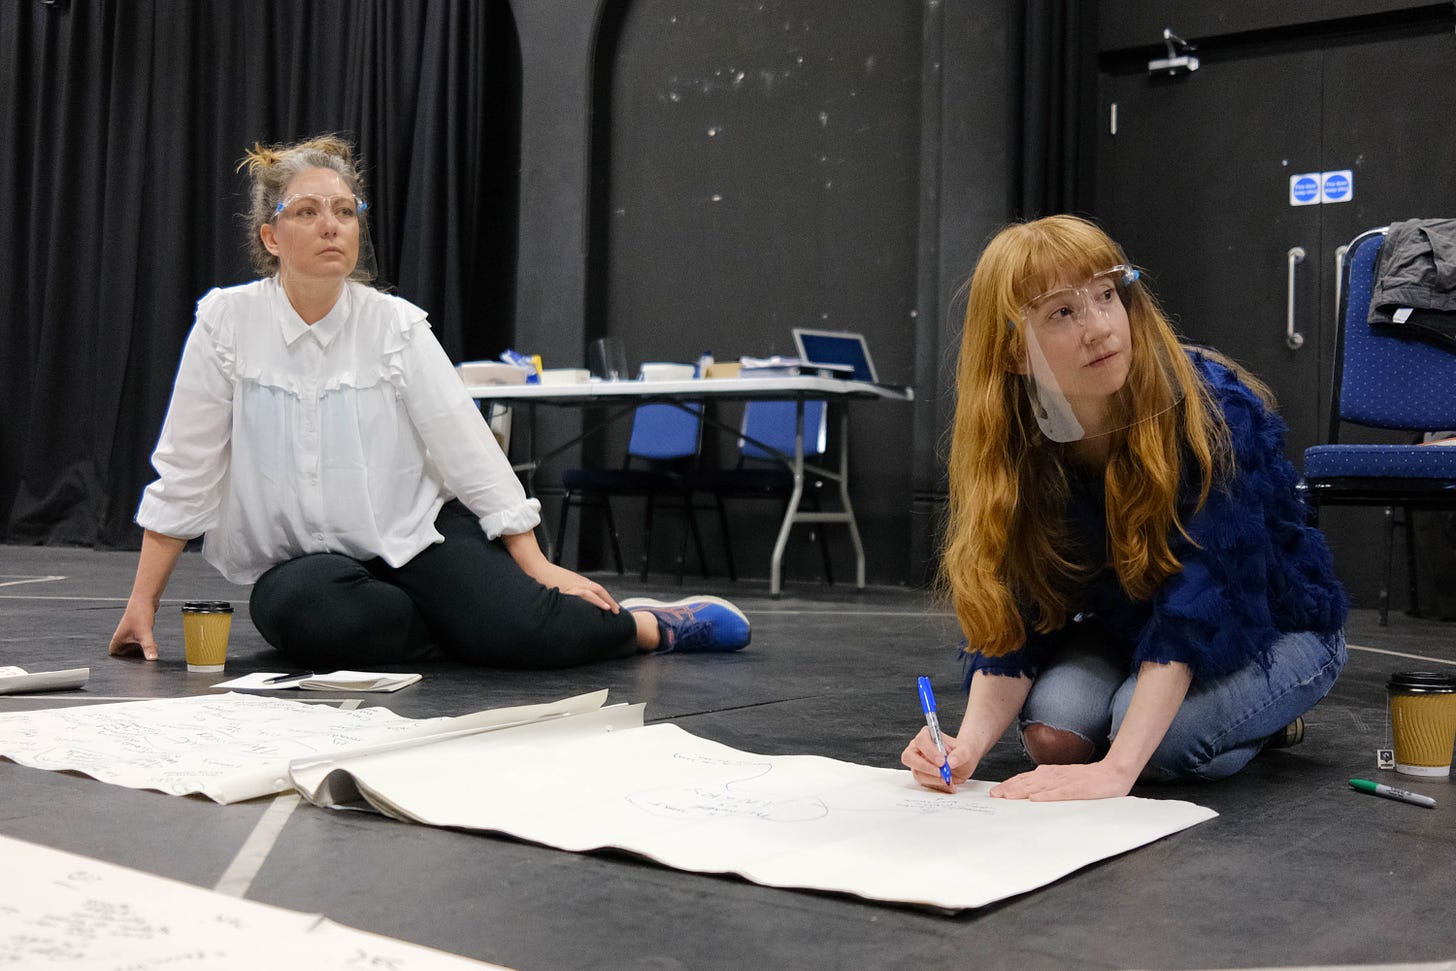 Two women in transparent masks sit in a rehearsal room on the floor beside big notepads of paper full of writing